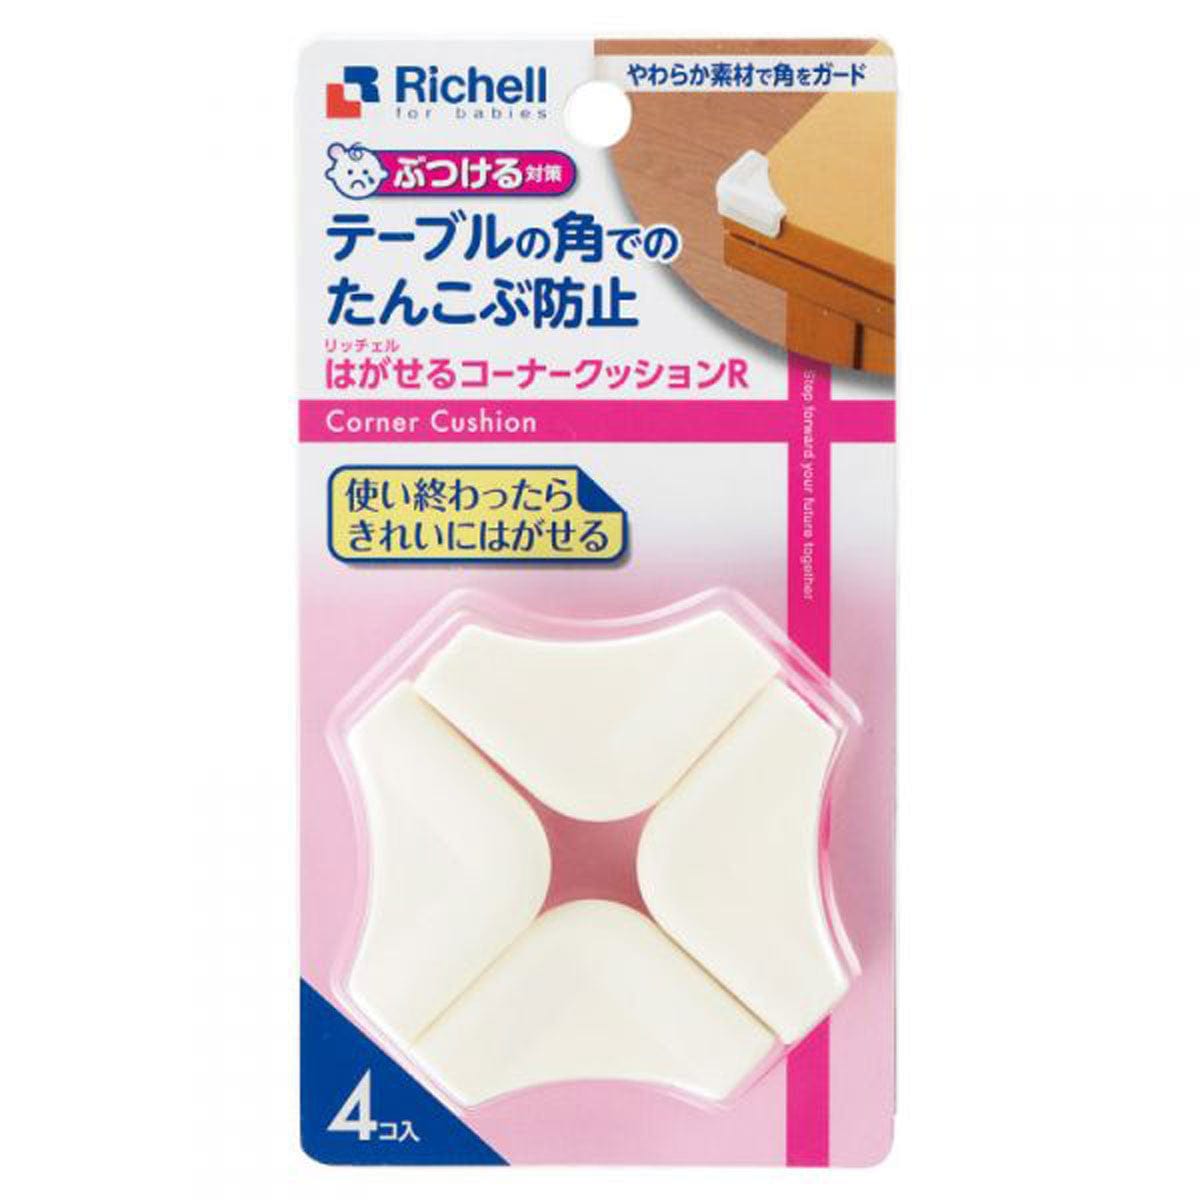 Richell - Baby Corner Cushion Edge Protection 4 Pieces -  Baby Corner Guards  Durio.sg